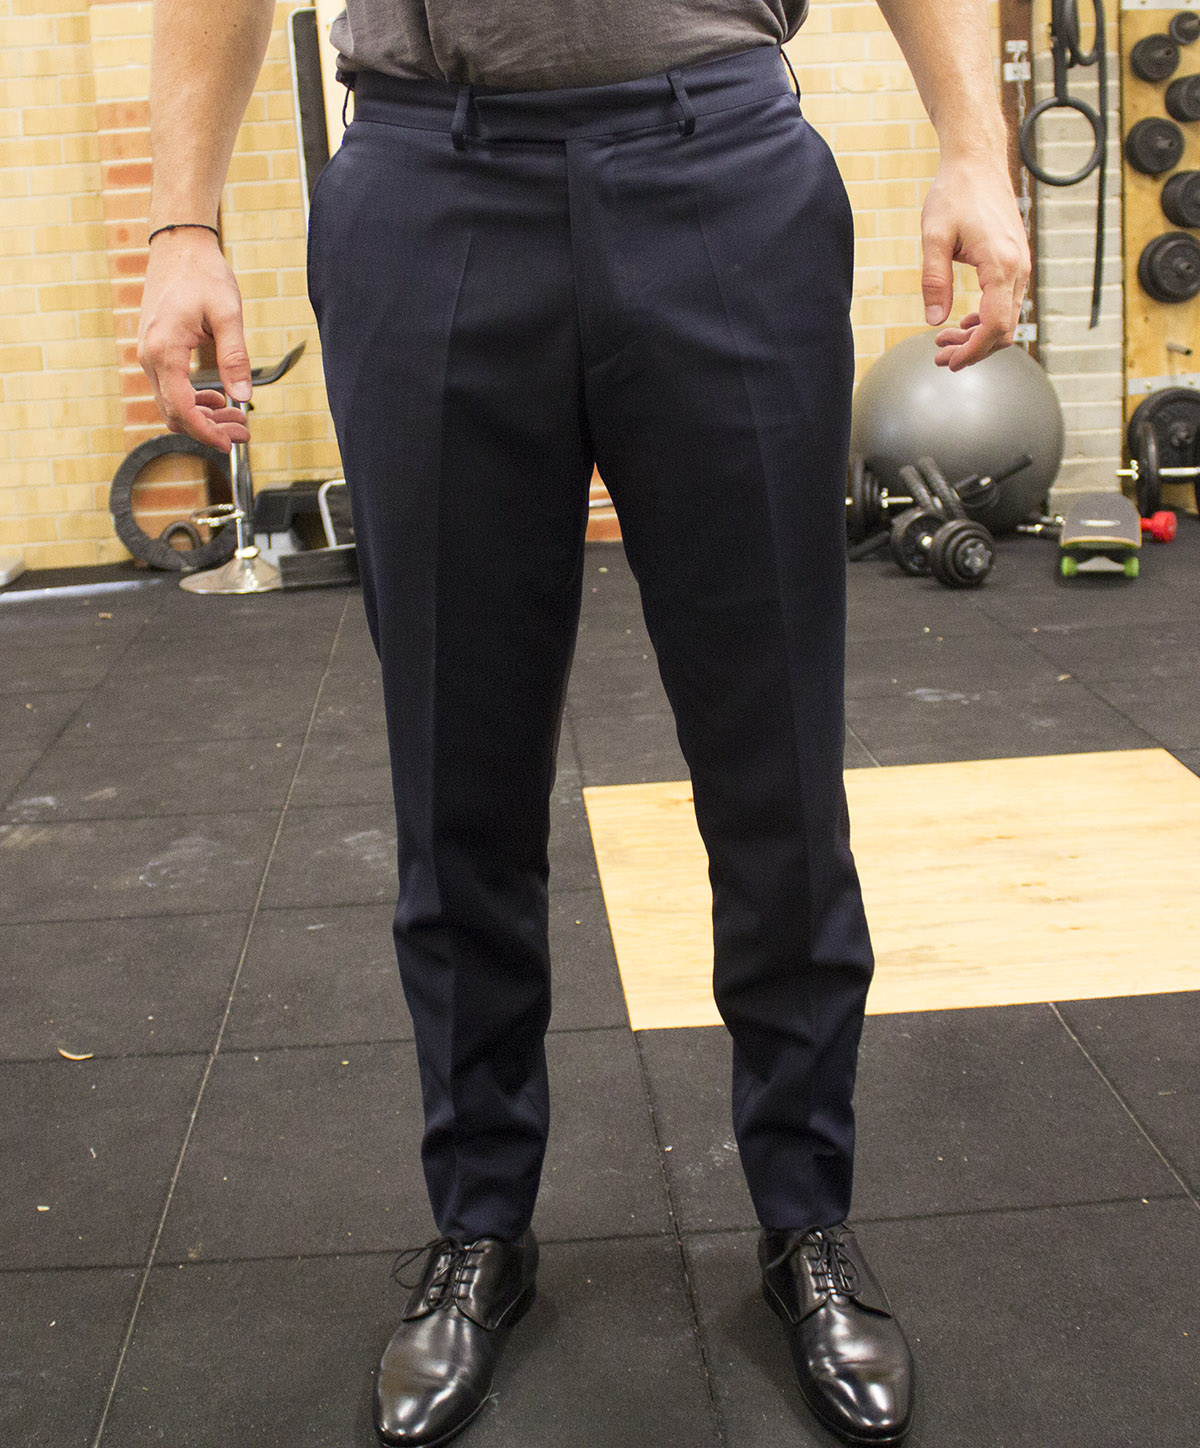 Are my pants tapered too much? | Styleforum